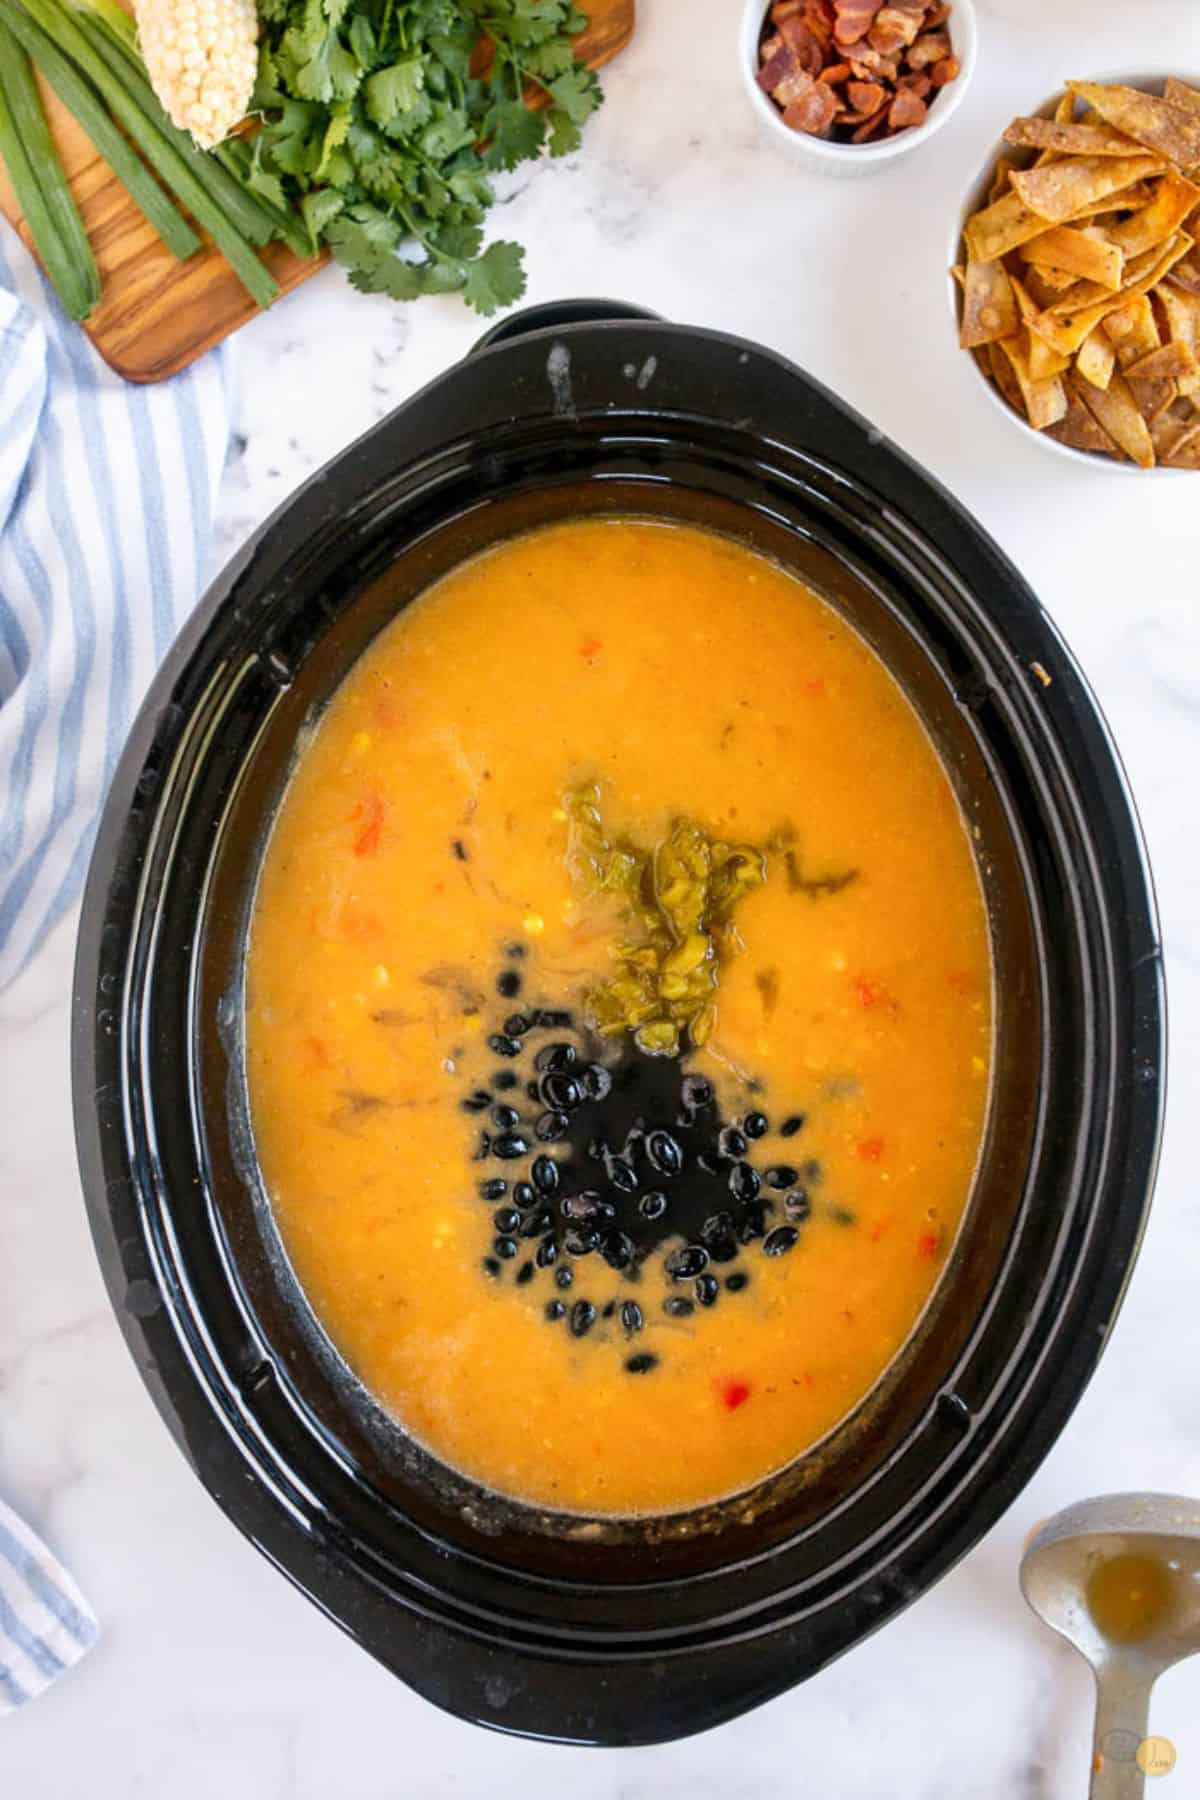 crockpot of soup with black beans